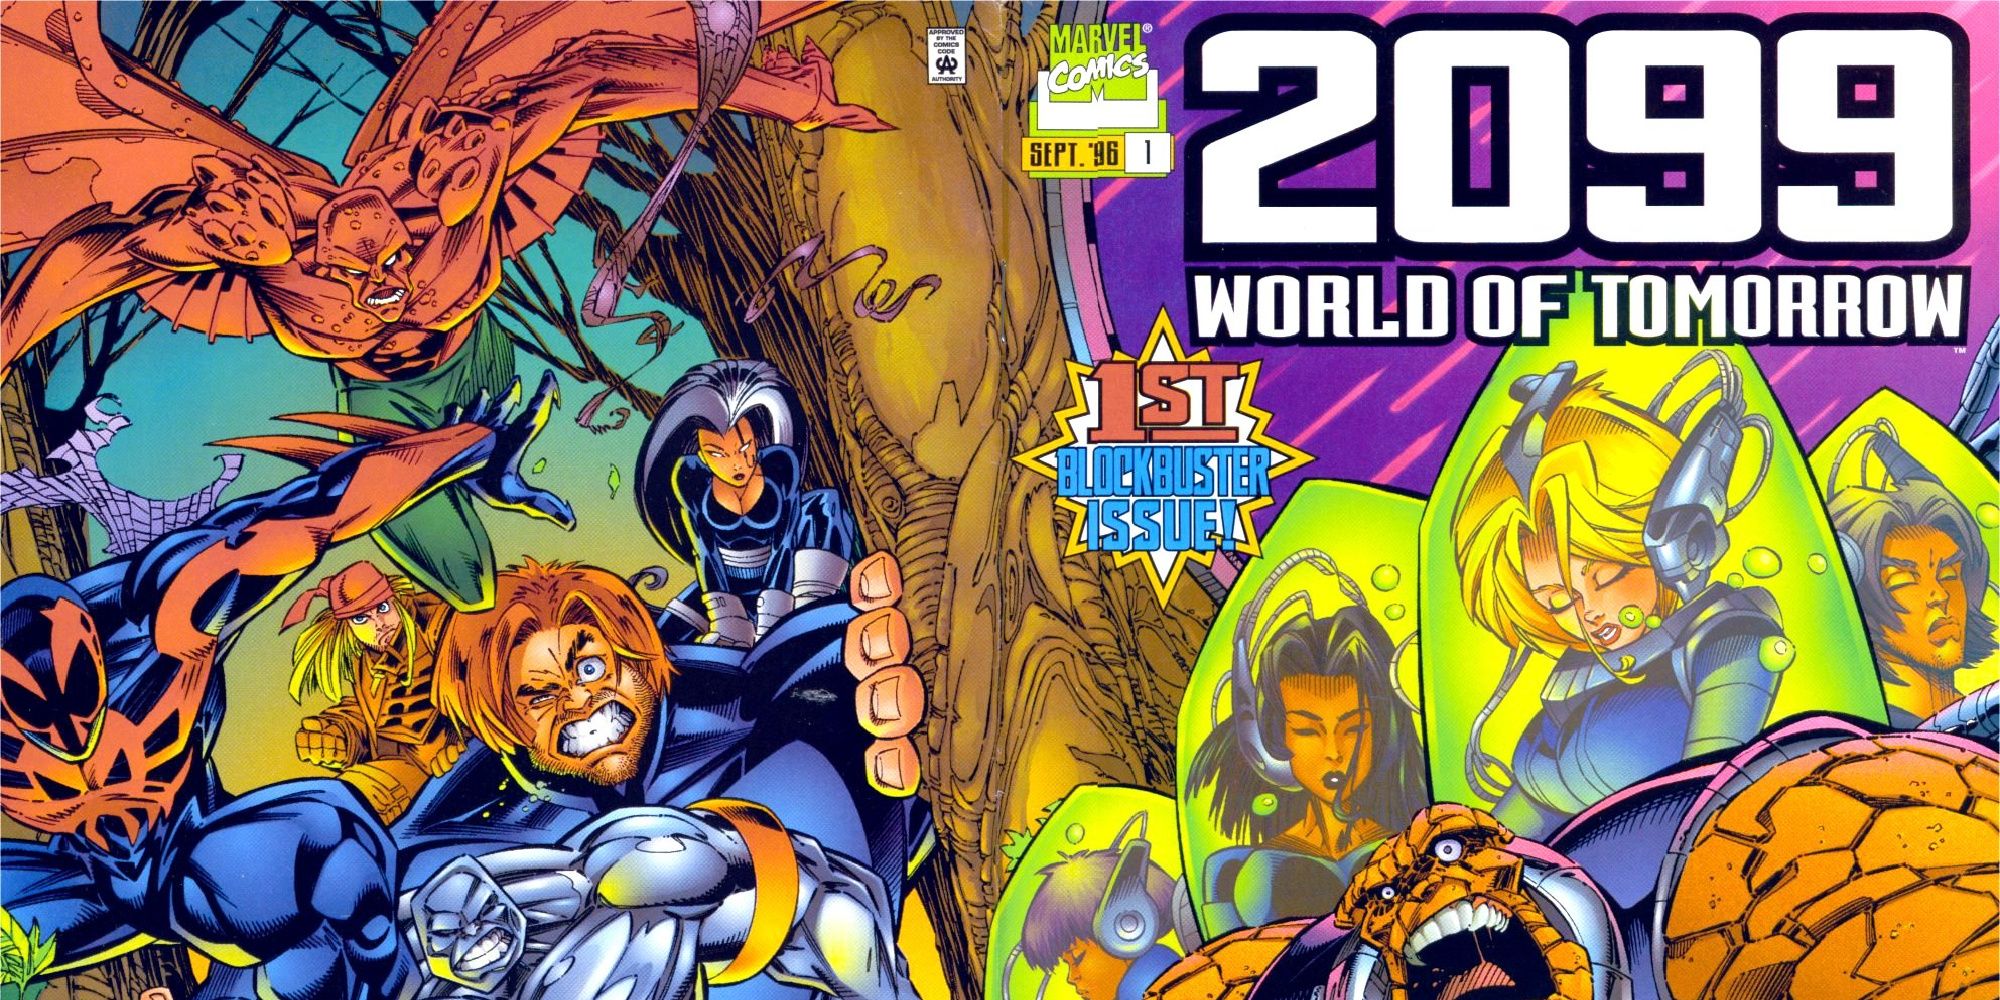 The cover of 2099 World of Tomorrow in Marvel Comics.